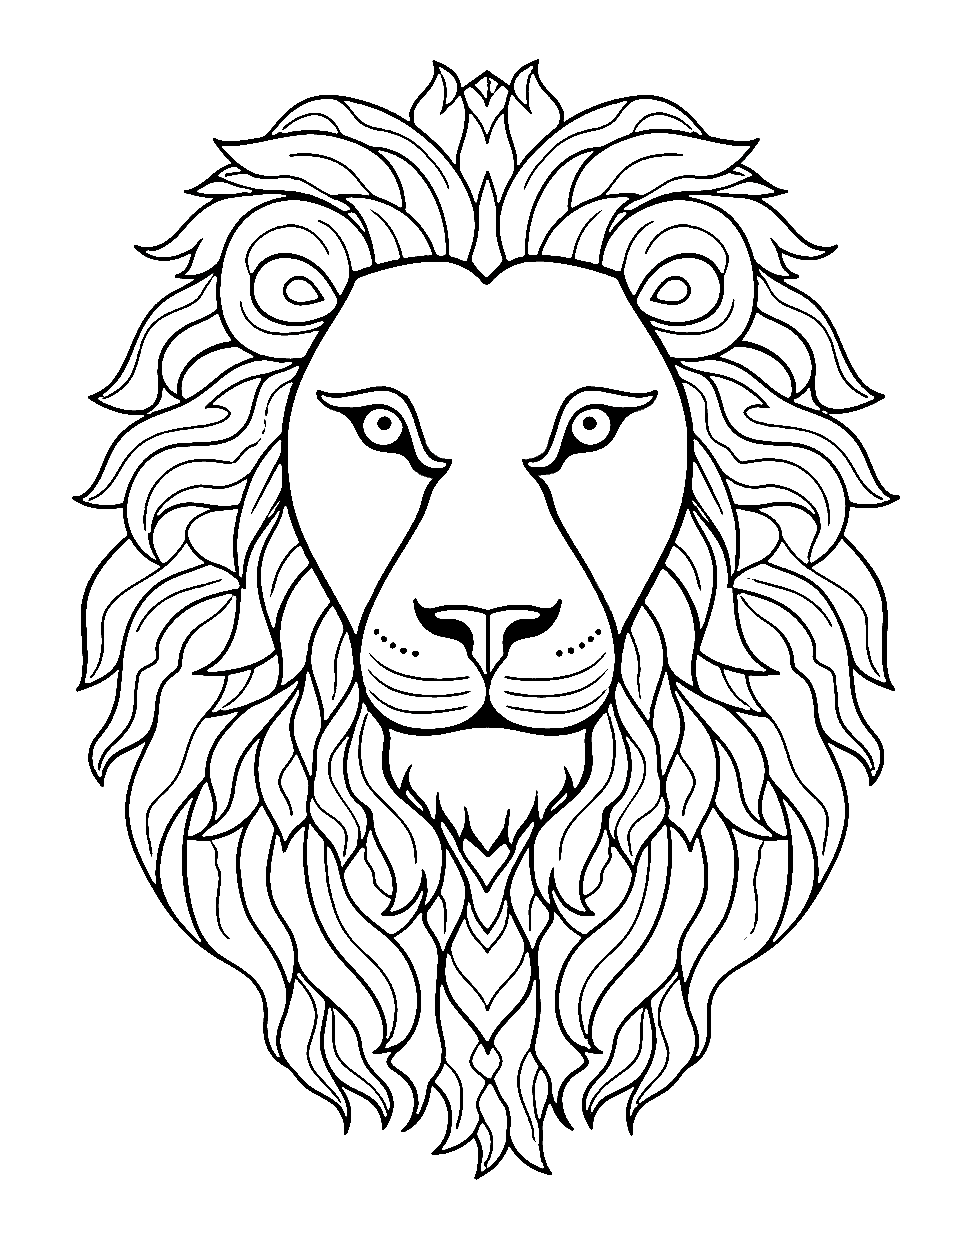 Detailed Lion Face Coloring Page - A lion’s face showcasing its intricate features.